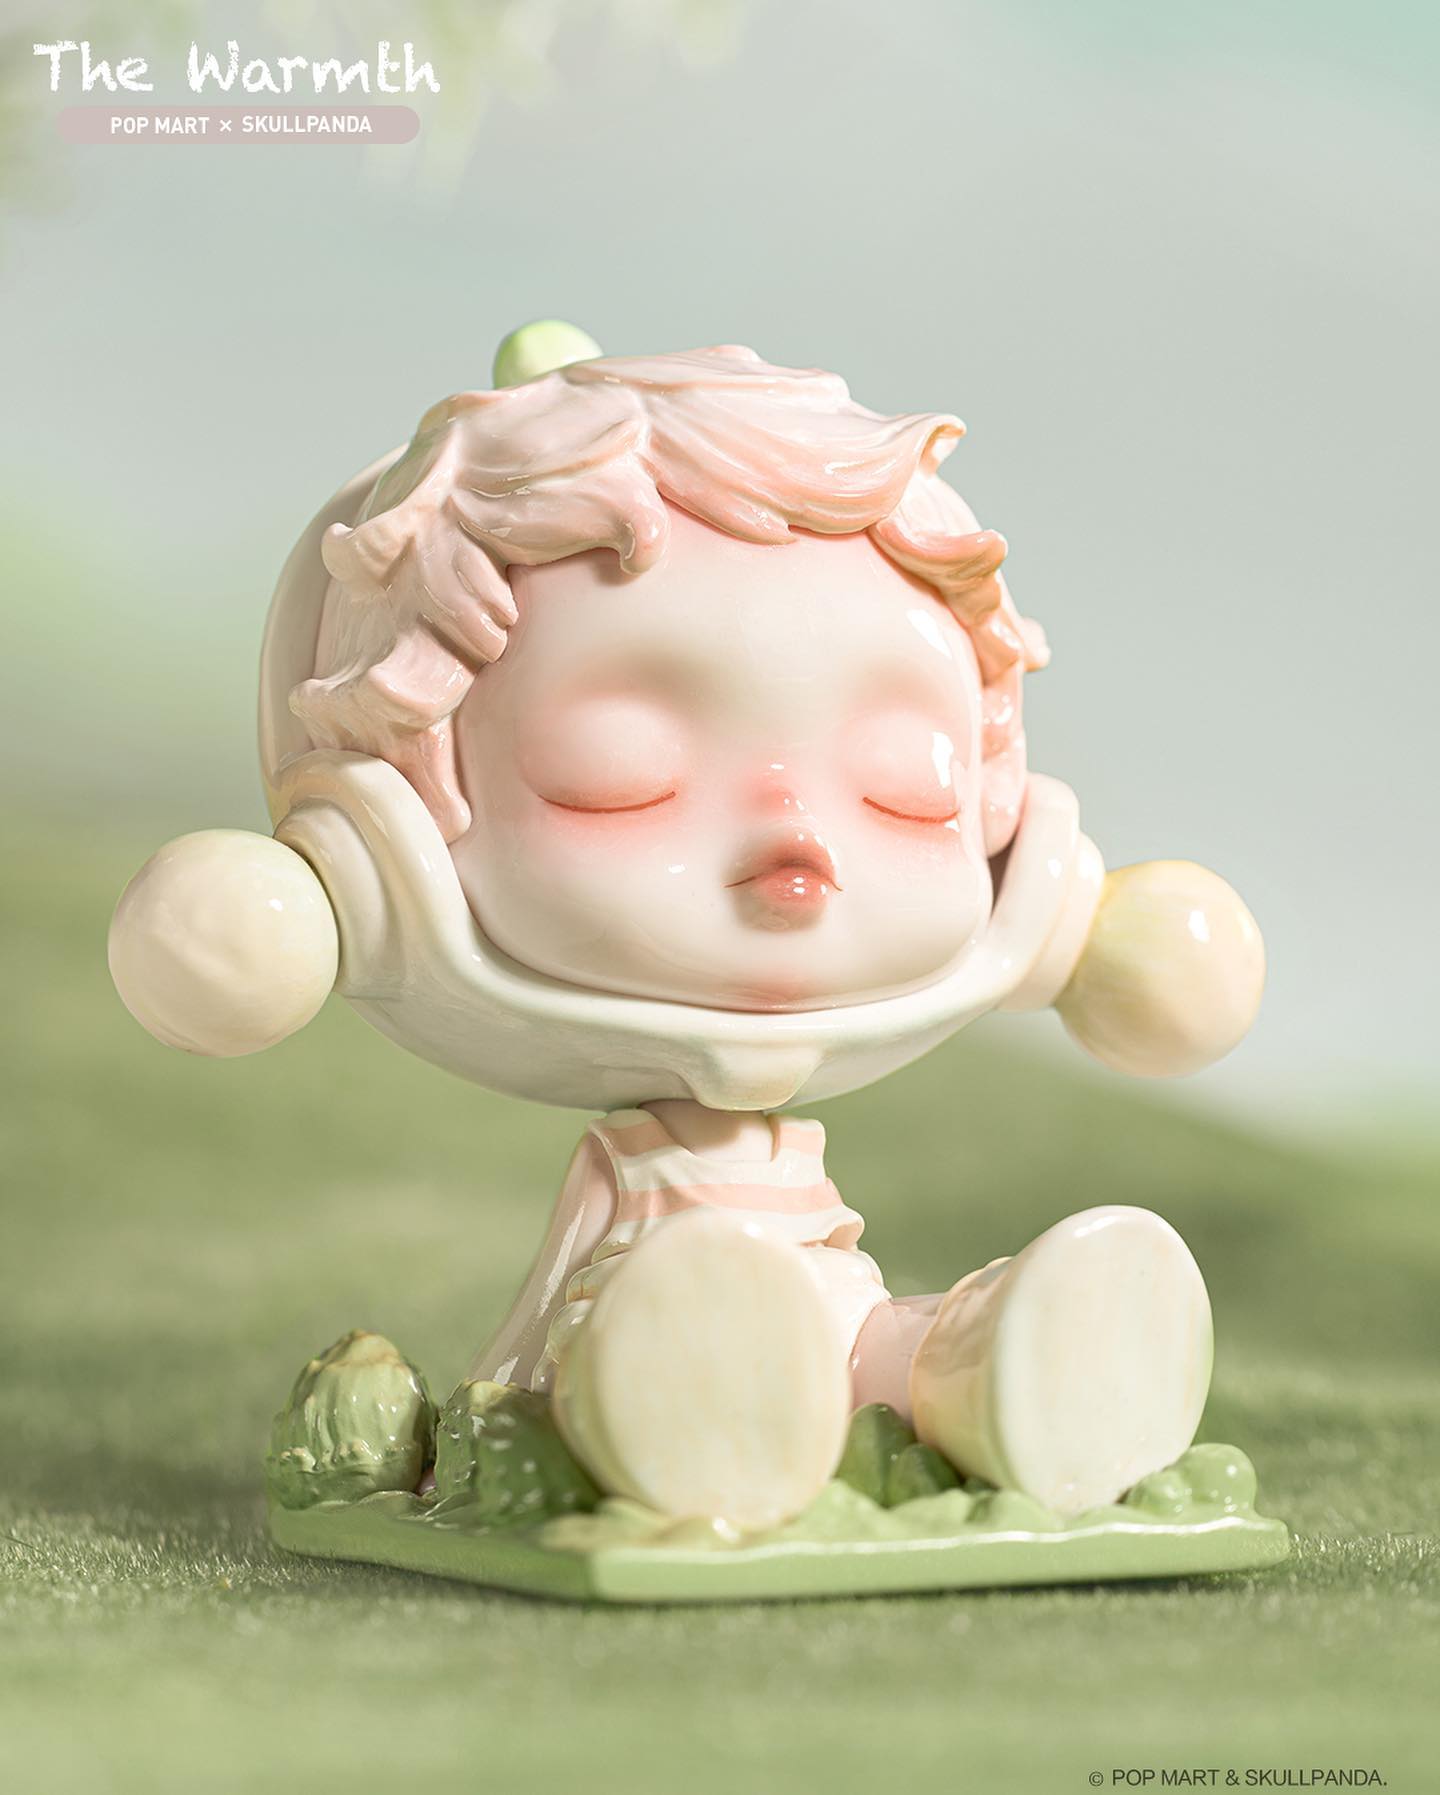 SKULLPANDA x POP MART The Warmth Blind Box Series - The Toy Chronicle